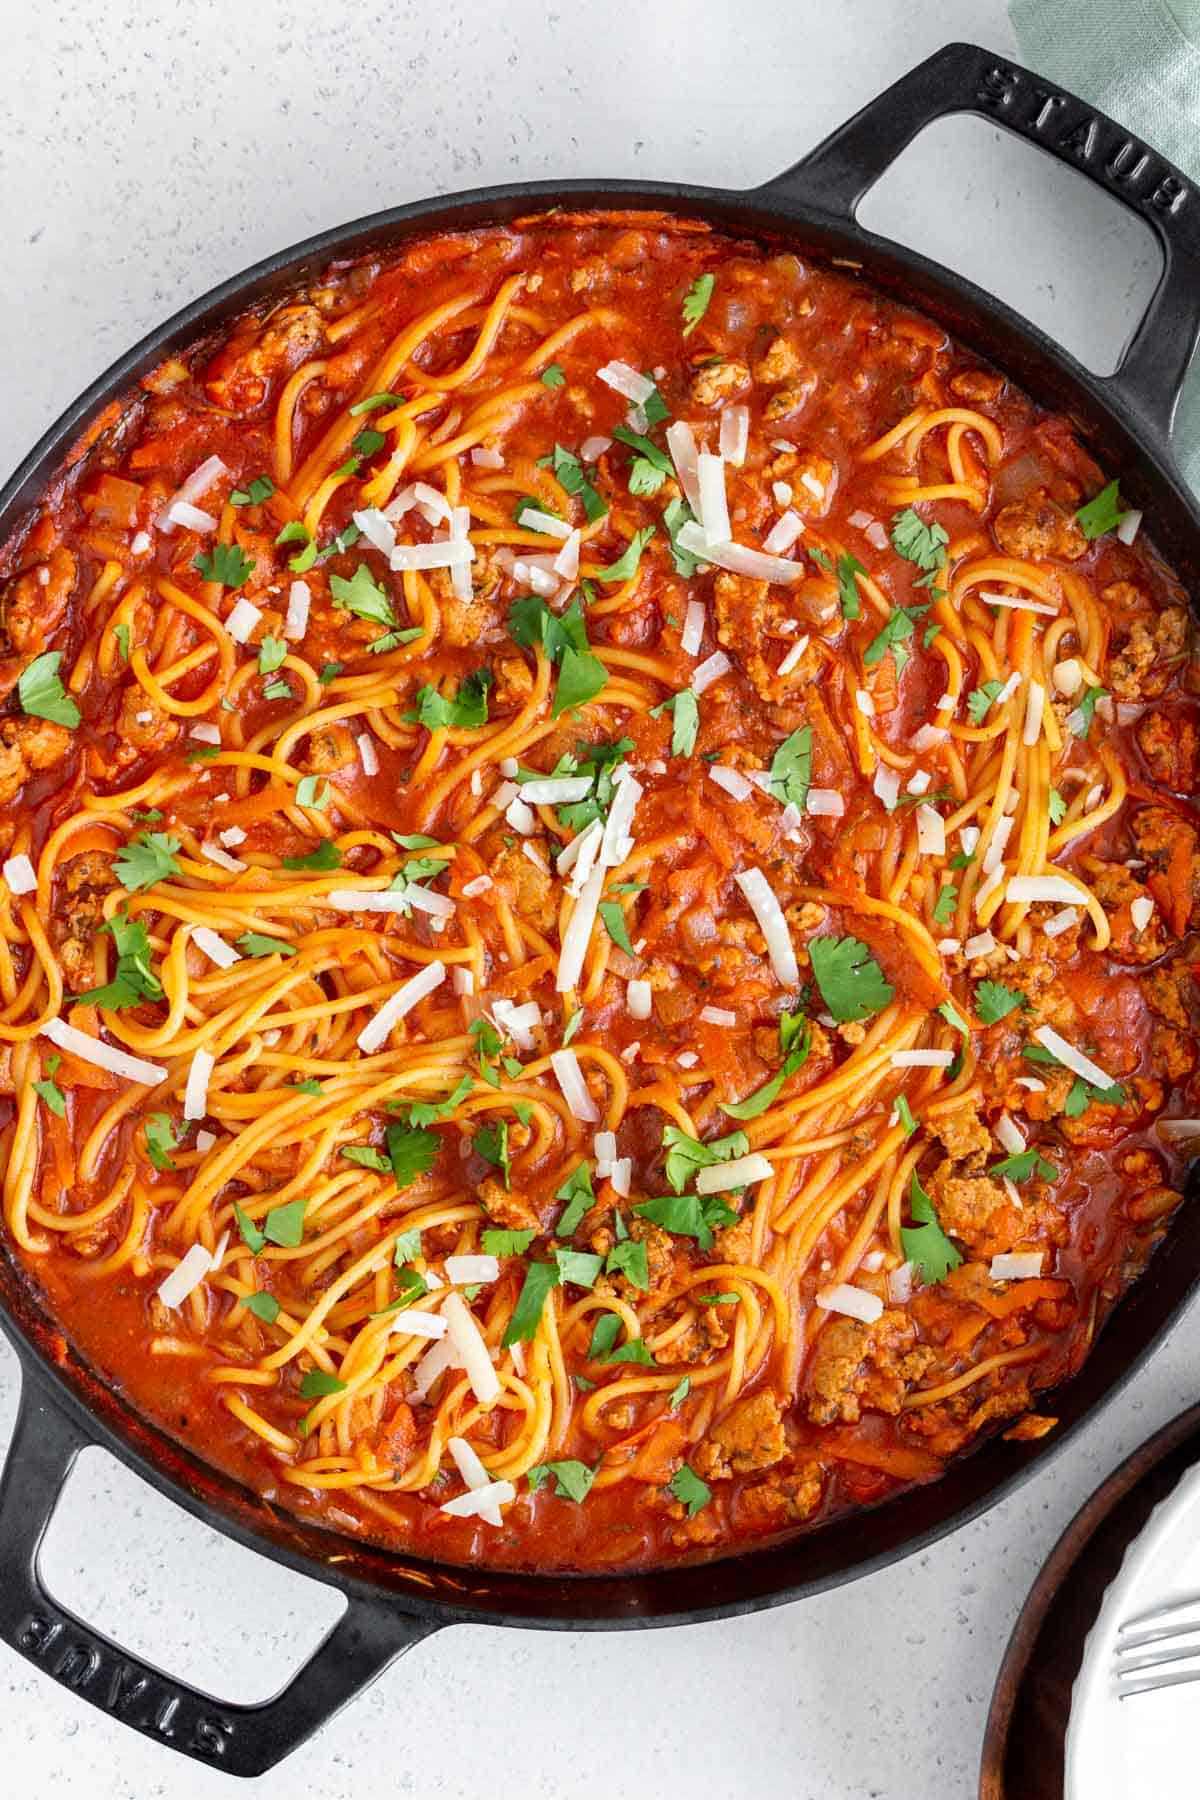 Overhead view of a skillet of spaghetti with meat sauce topped with parsley and parmesan.